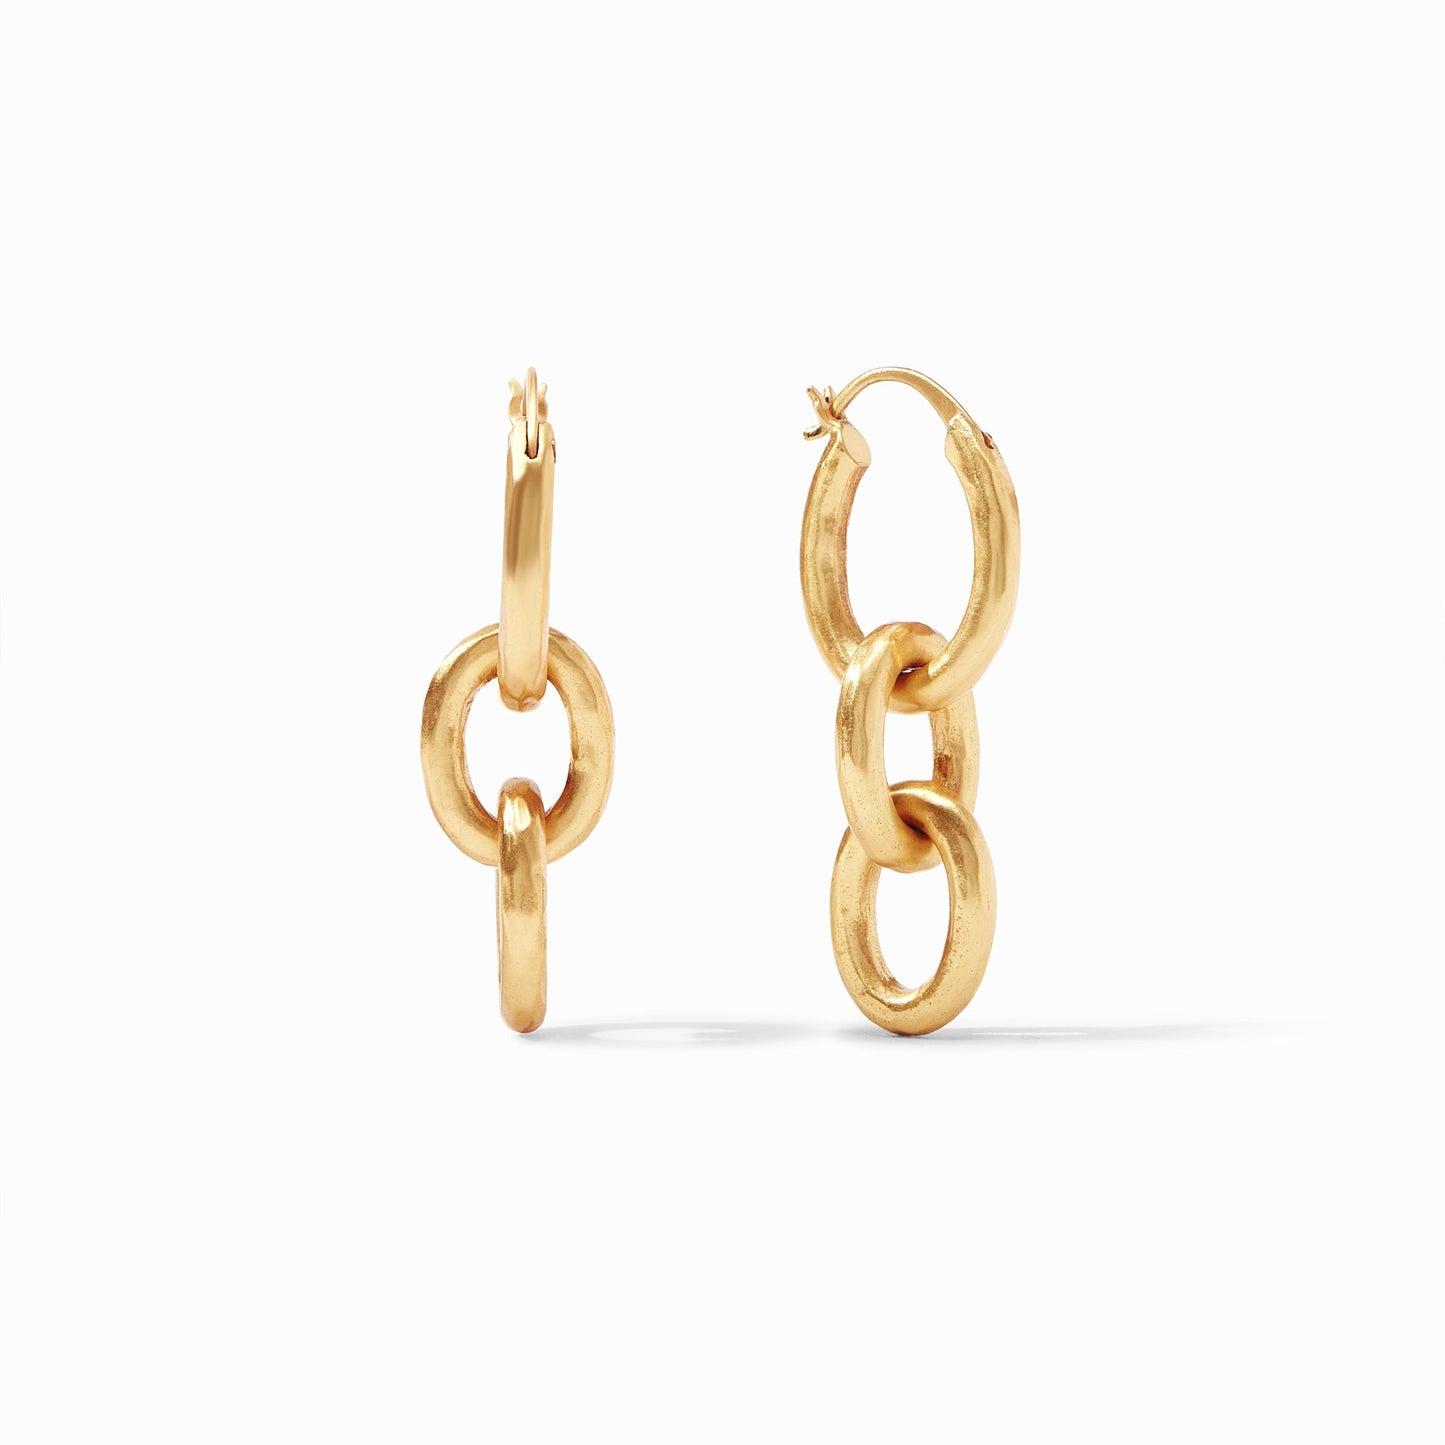 Load image into Gallery viewer, Palermo 2-in-1 Earring Gold - Muse Shoe Studio
